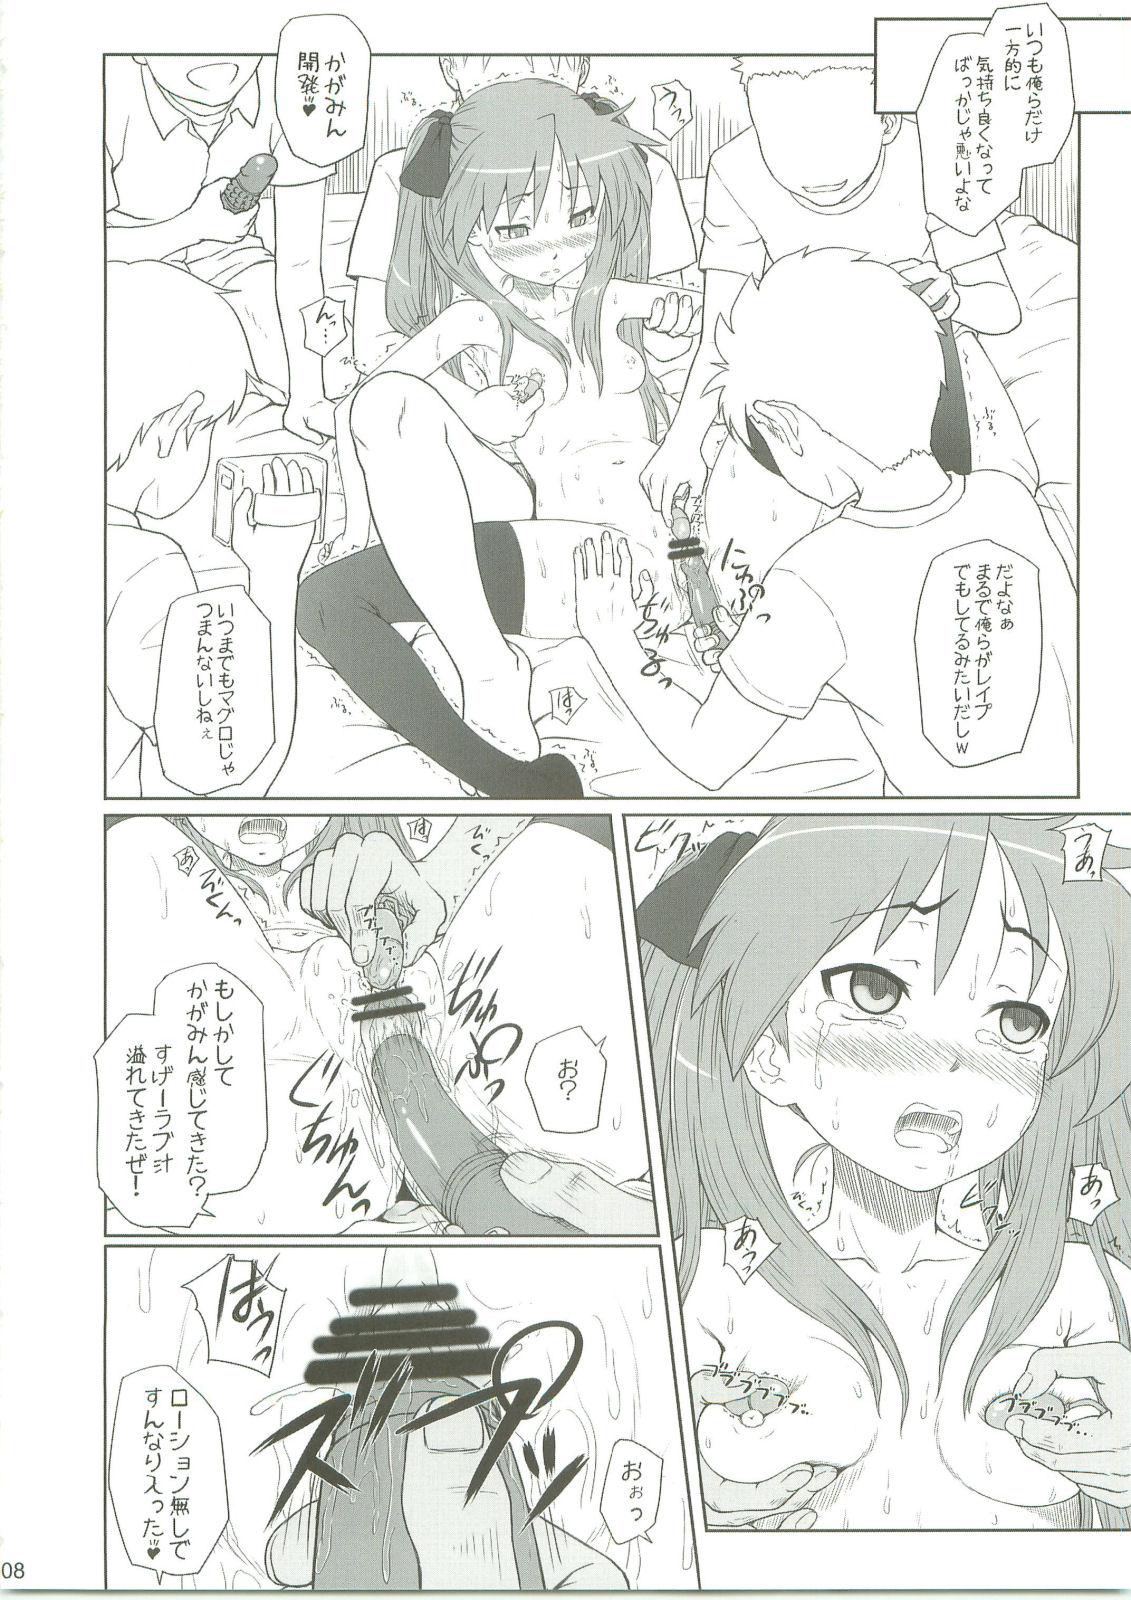 Pierced Kagamin wa Ore no Yome 2 - Lucky star Spying - Page 7